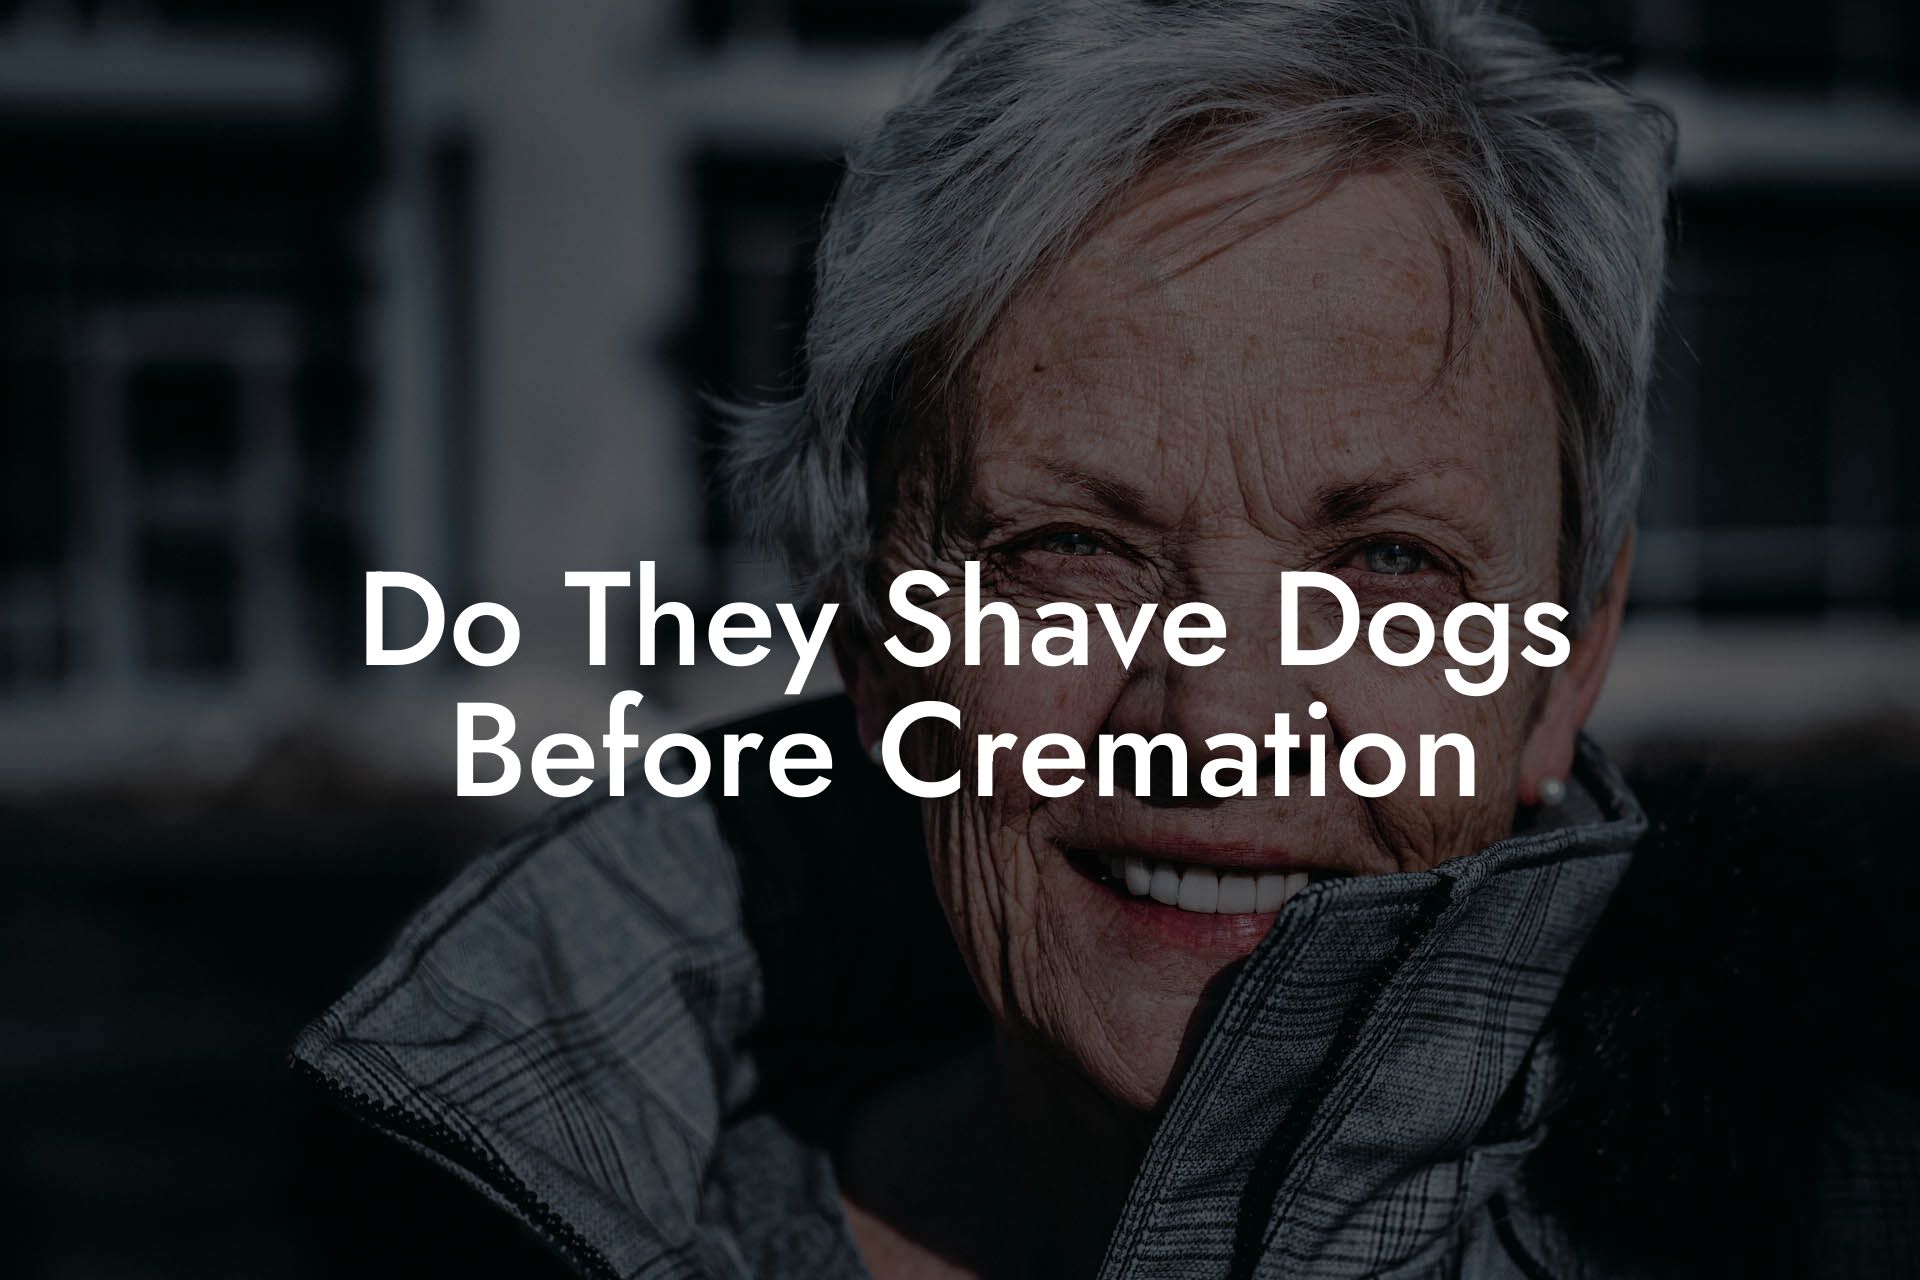 Do They Shave Dogs Before Cremation